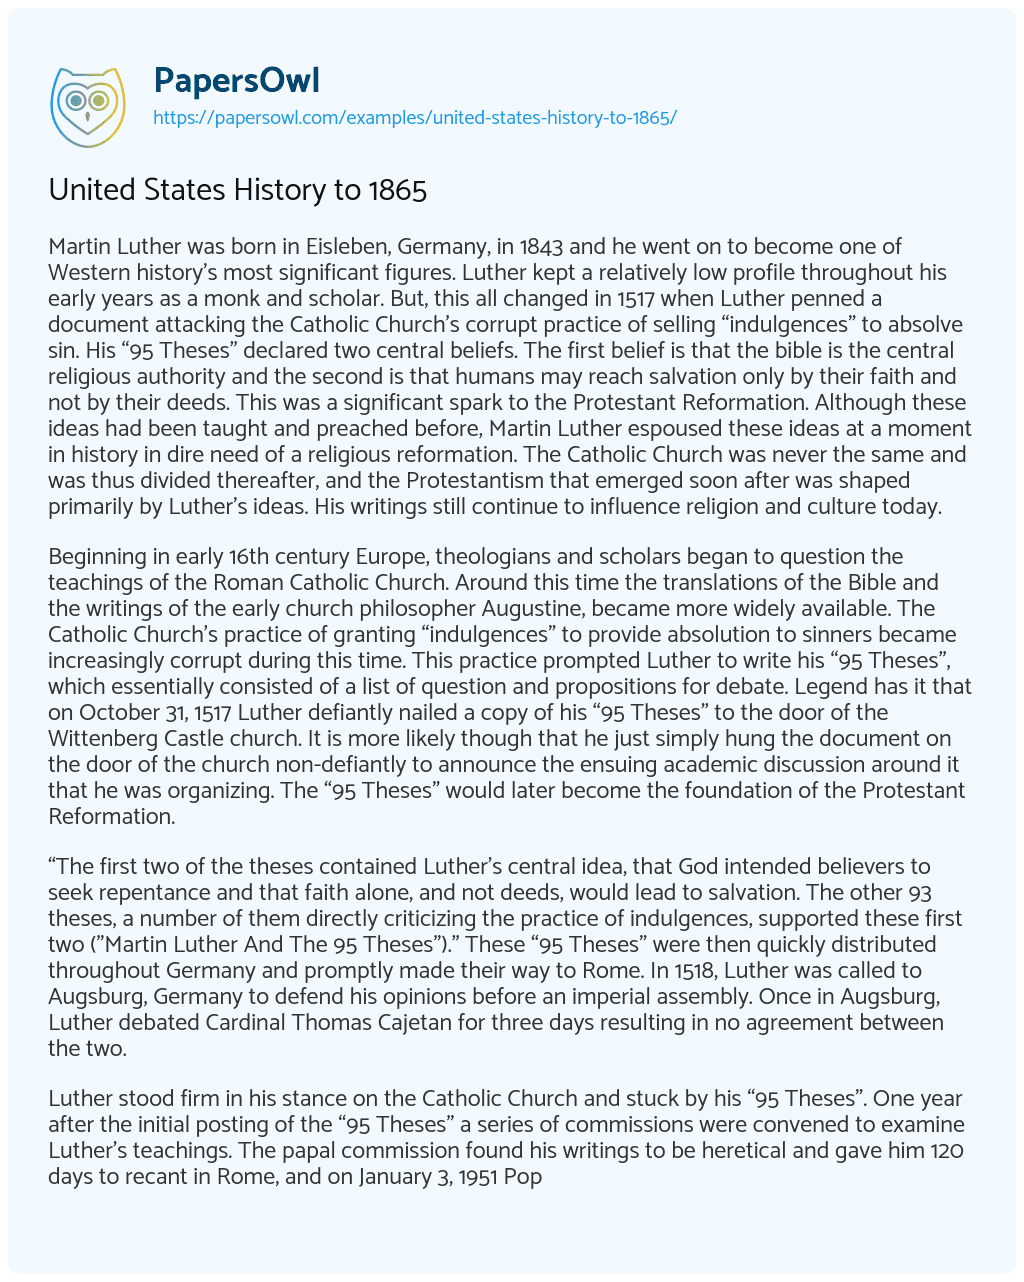 United States History to 1865 essay